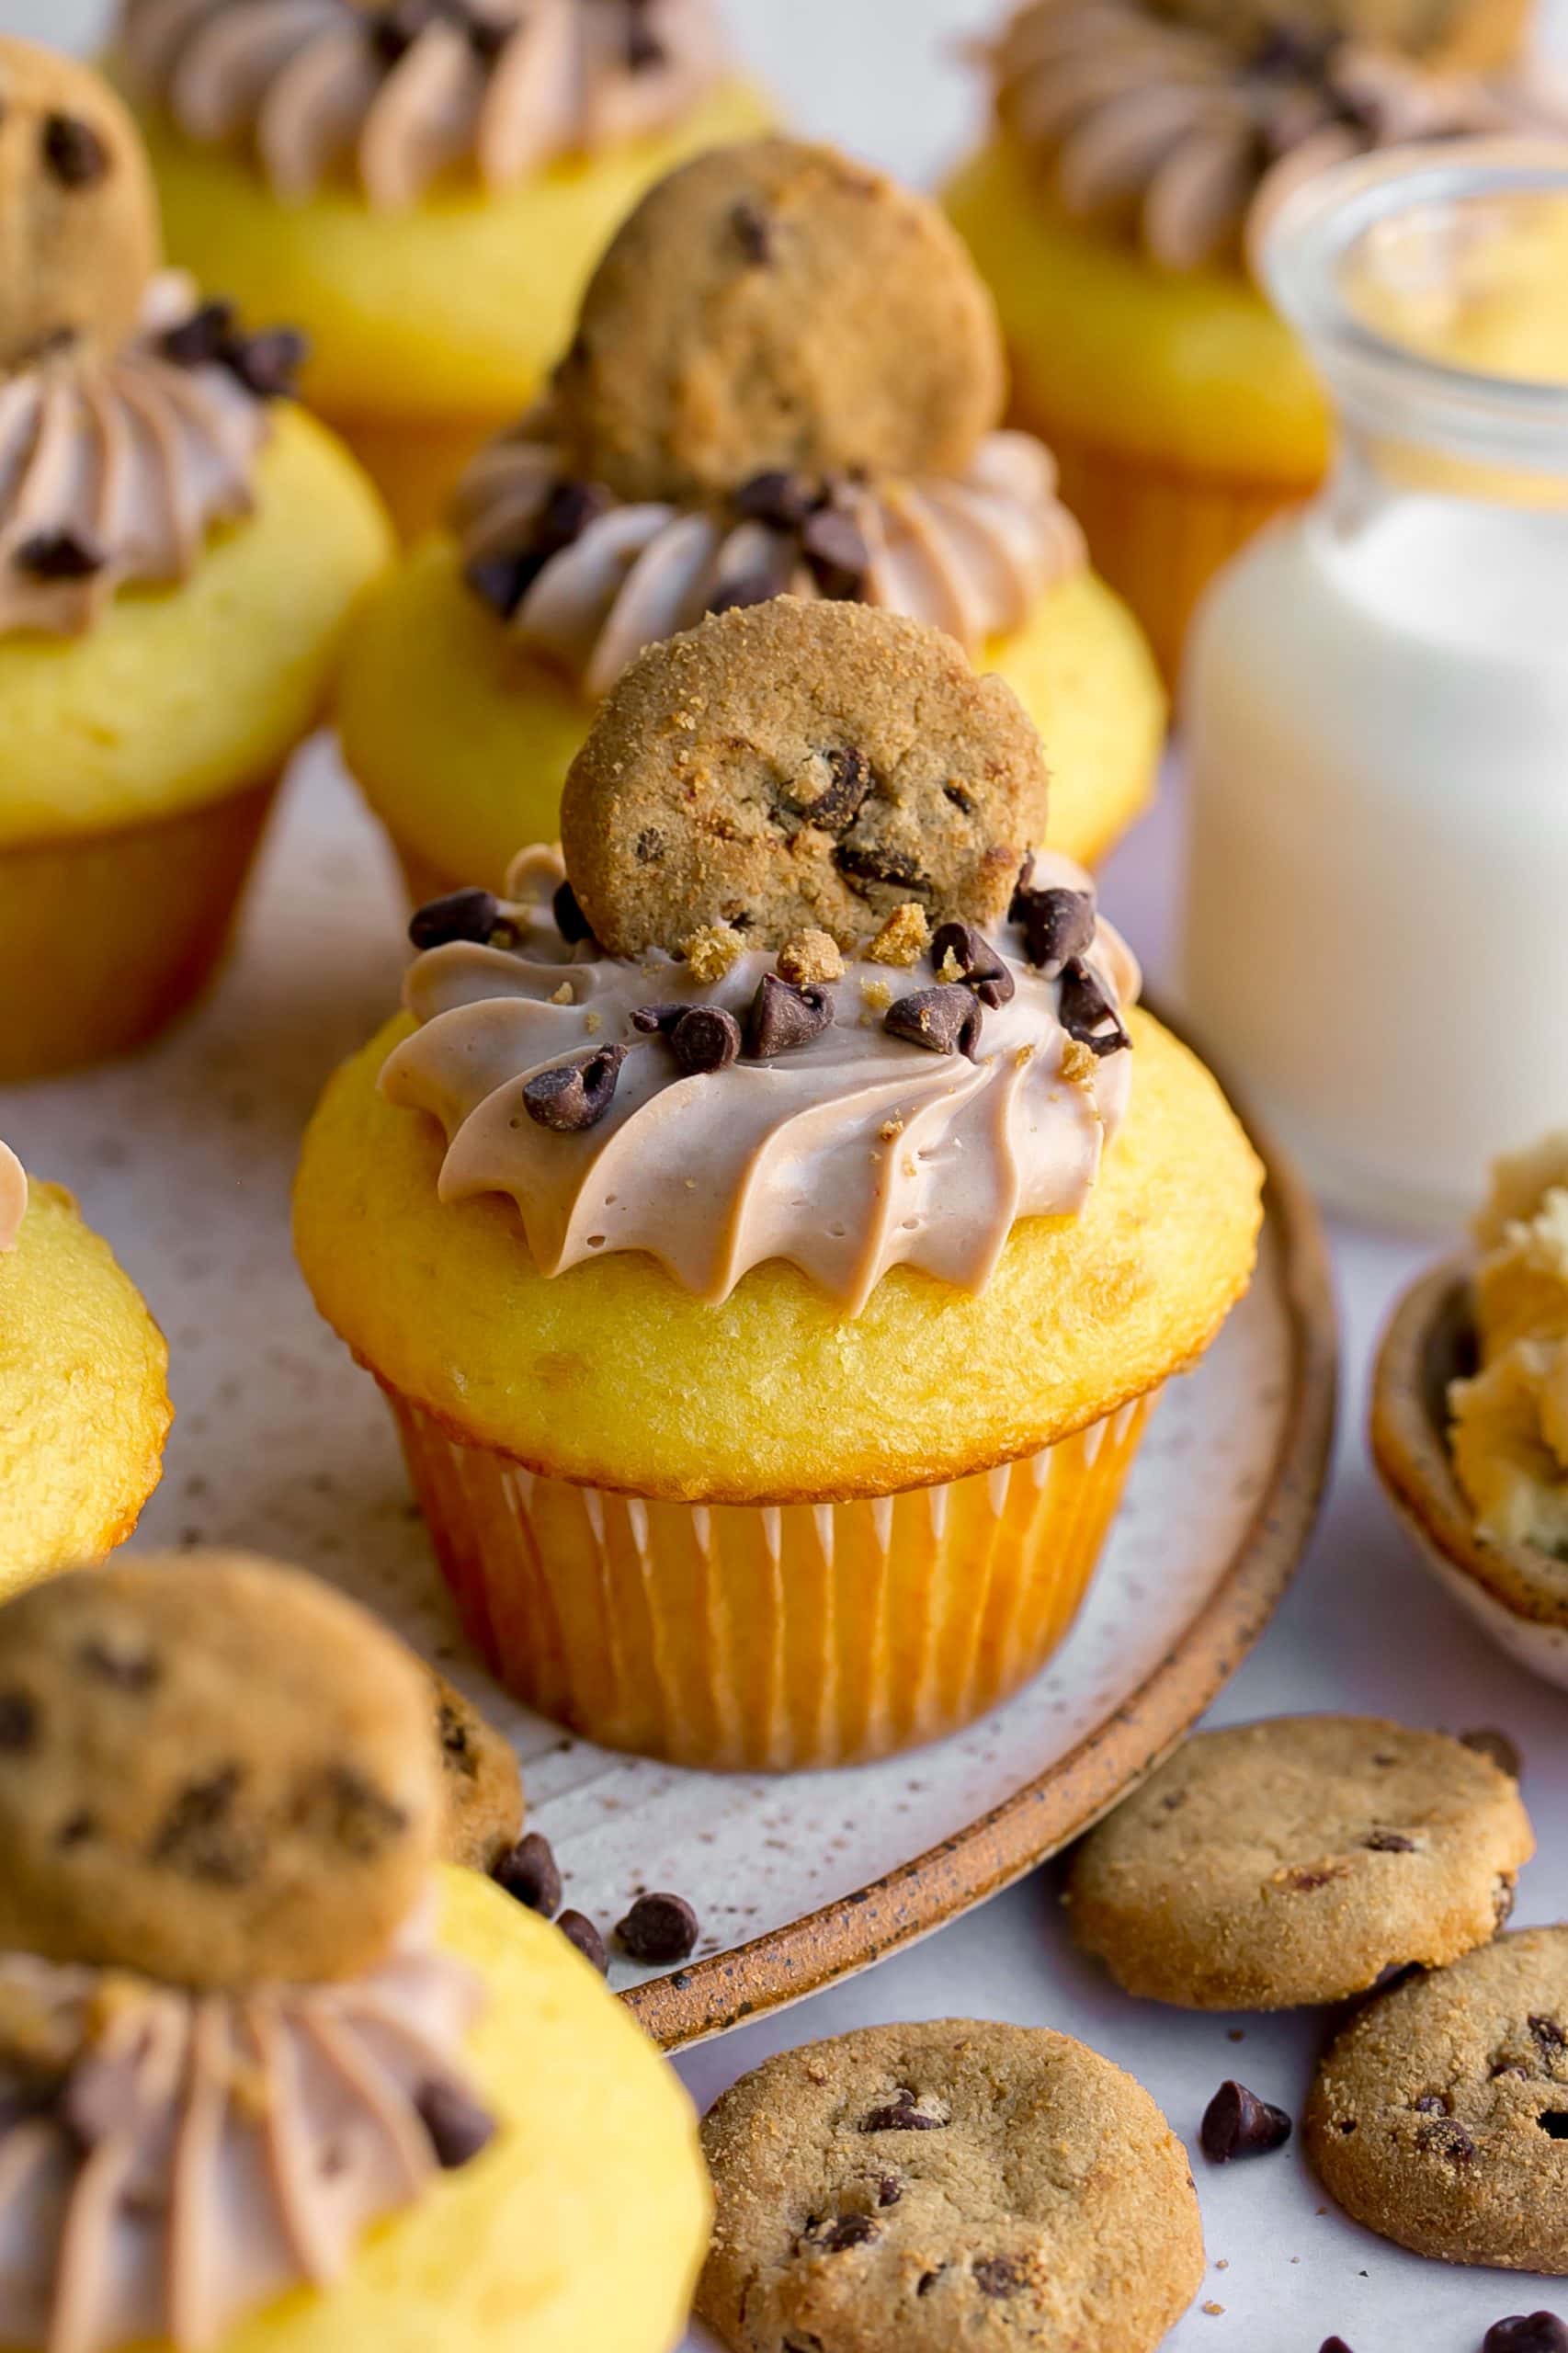 Chocolate Chip Cookie Dough Stuffed Cupcakes on plate.